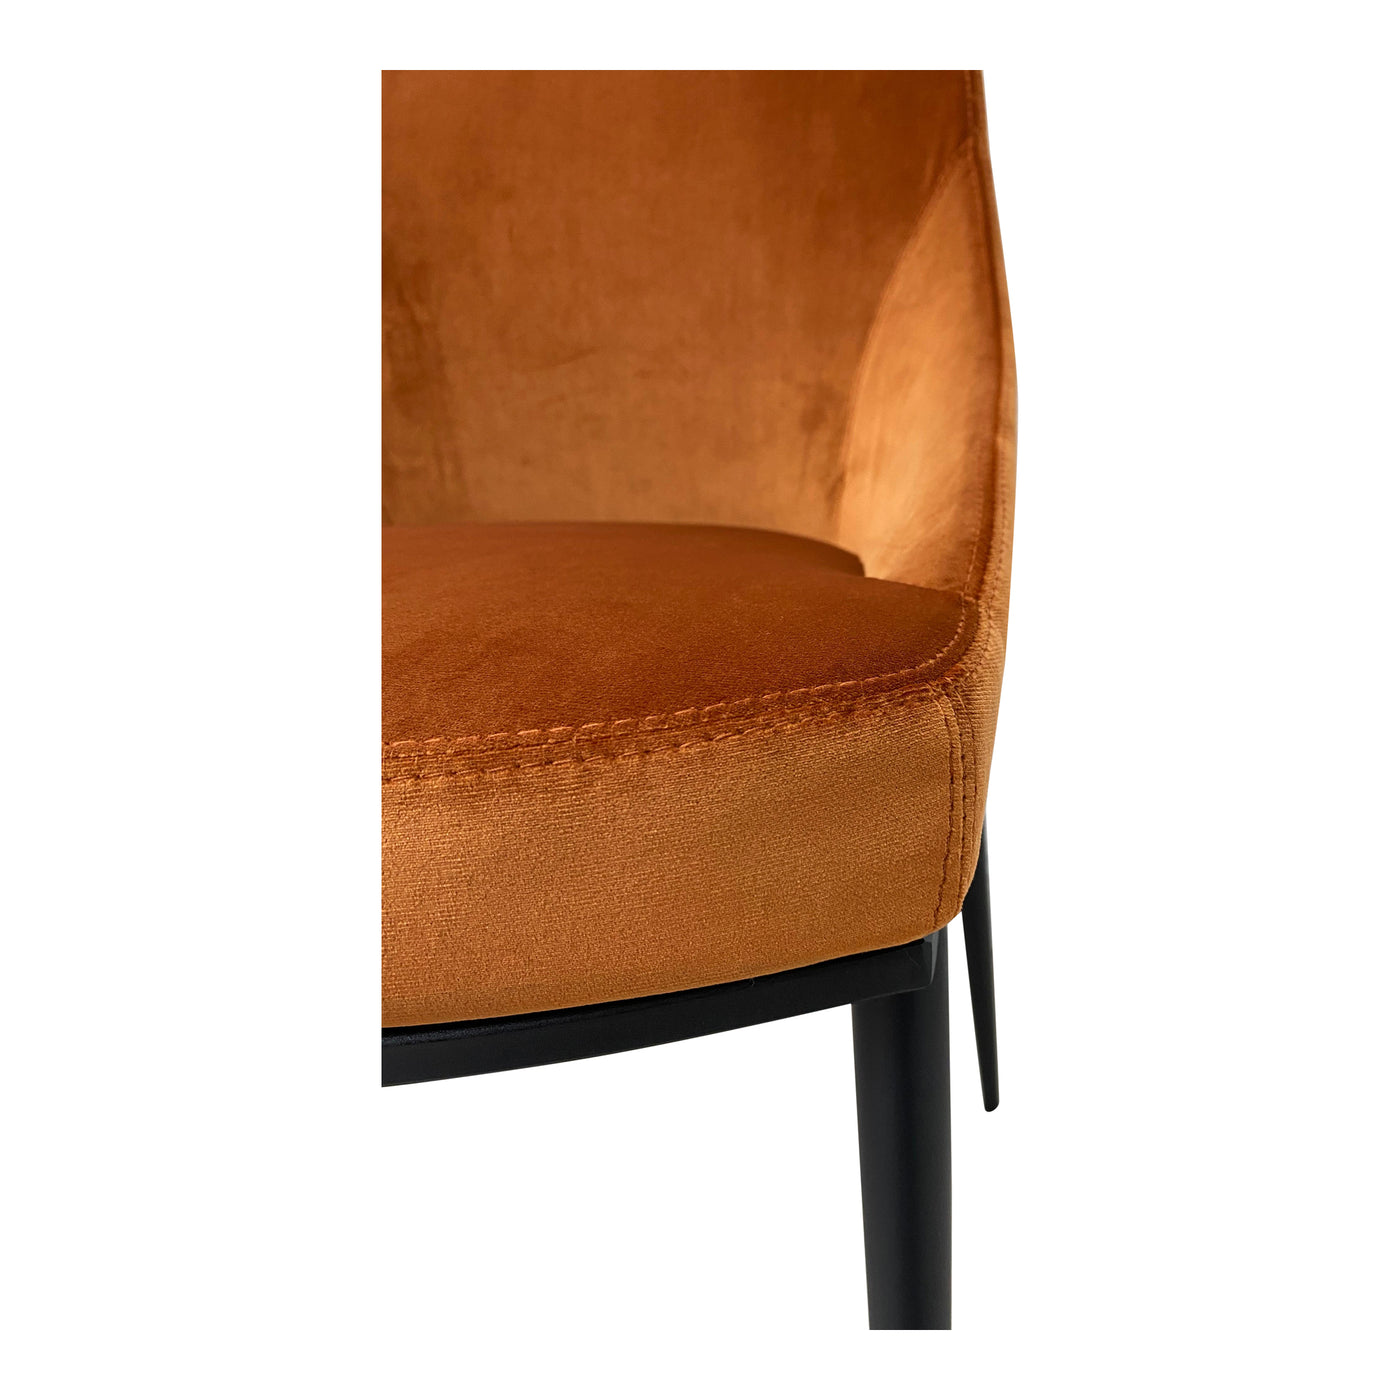 Simple and sophisticated with a modern twist. The Sedona dining chair's soft velvet upholstery and effortless style are wh...